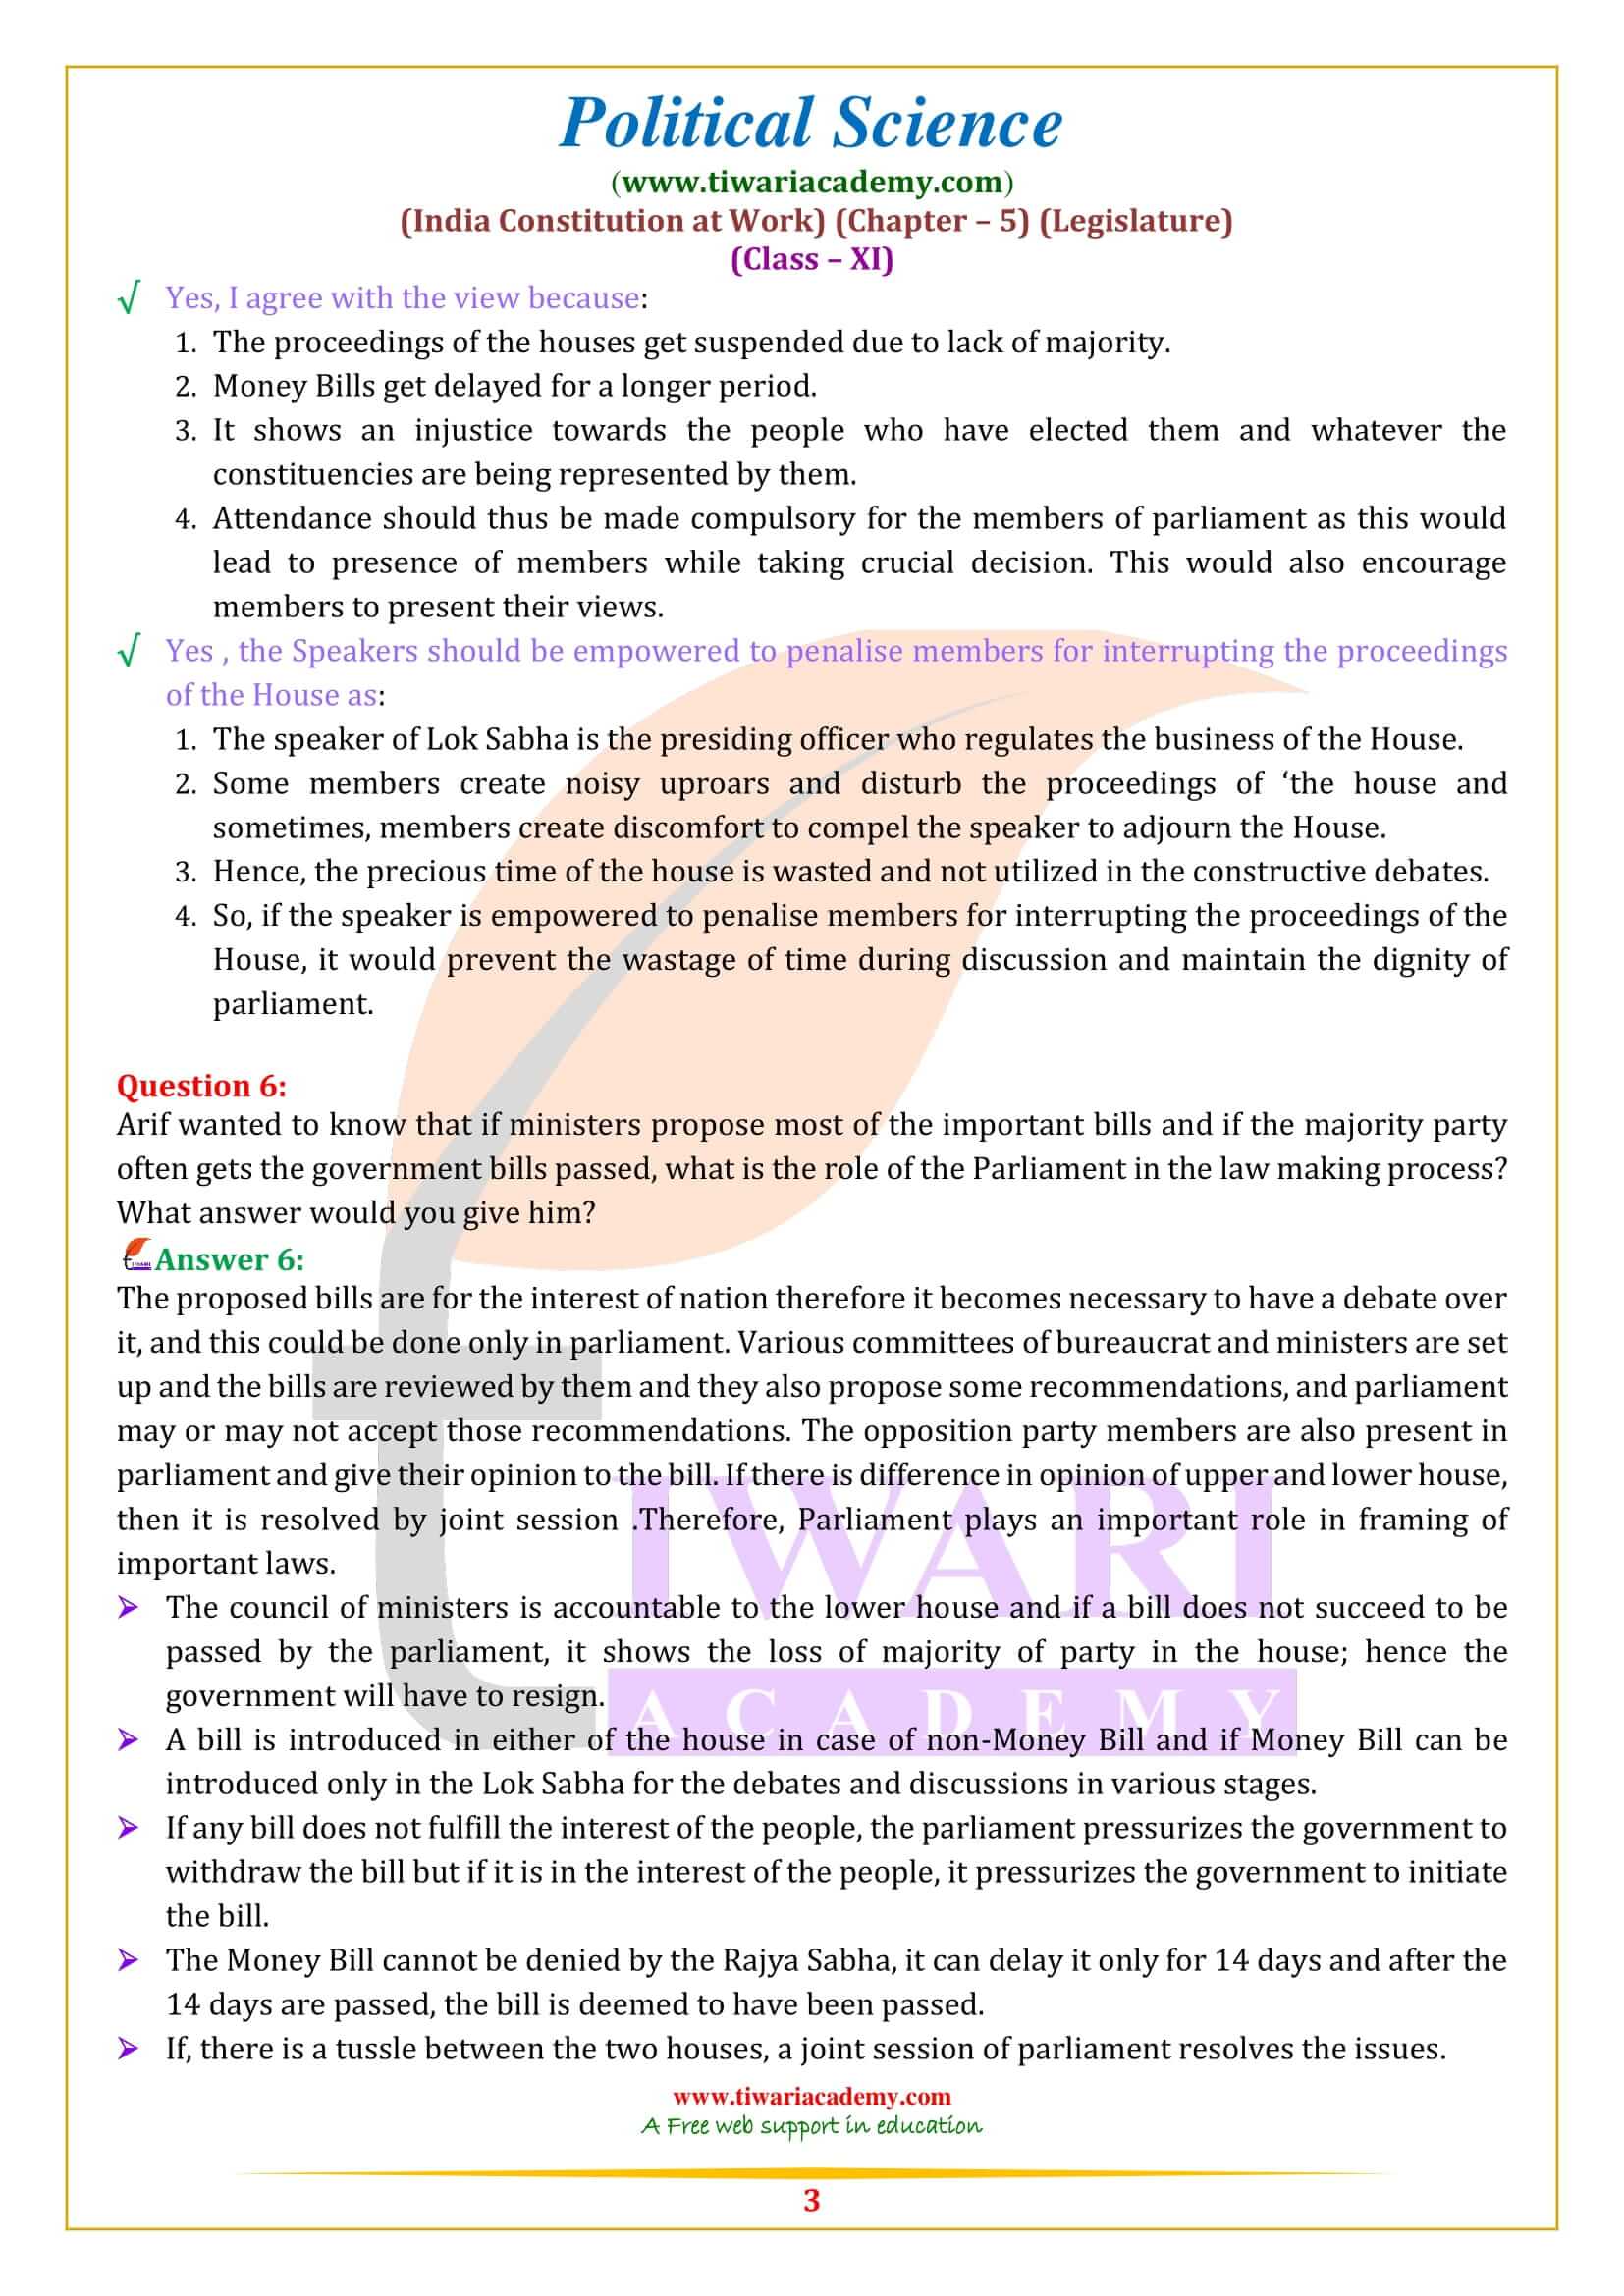 NCERT Solutions for Class 11 Political Science Chapter 5 in English Medium